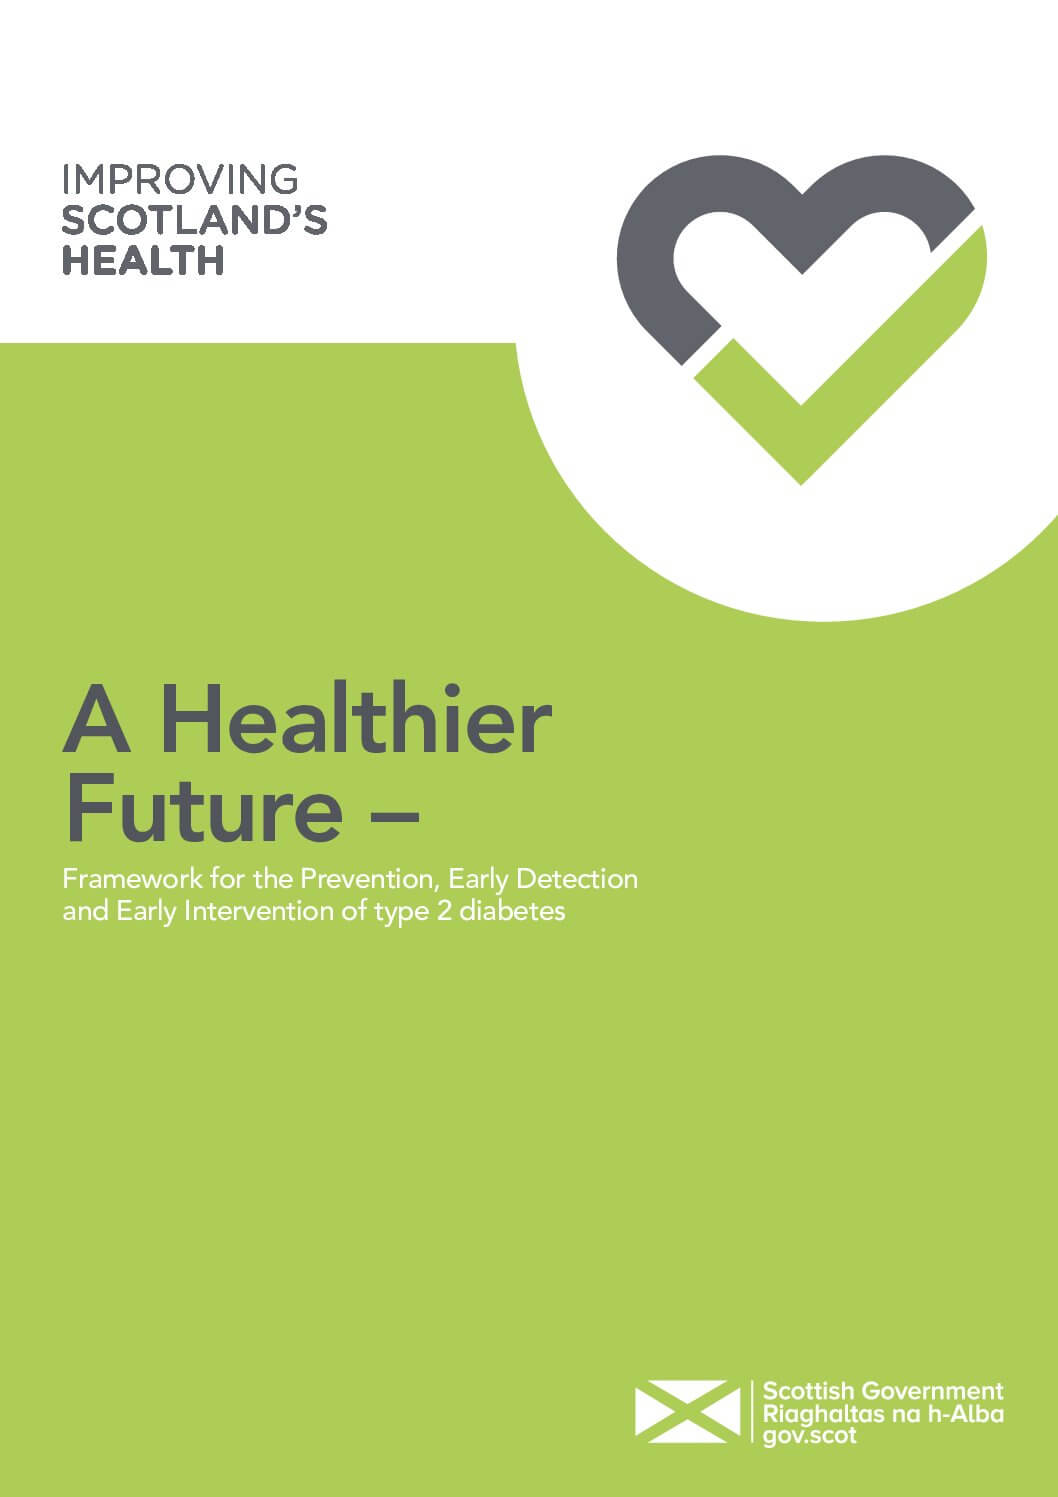 A Healthier Future – type 2 Diabetes prevention, early detection and intervention